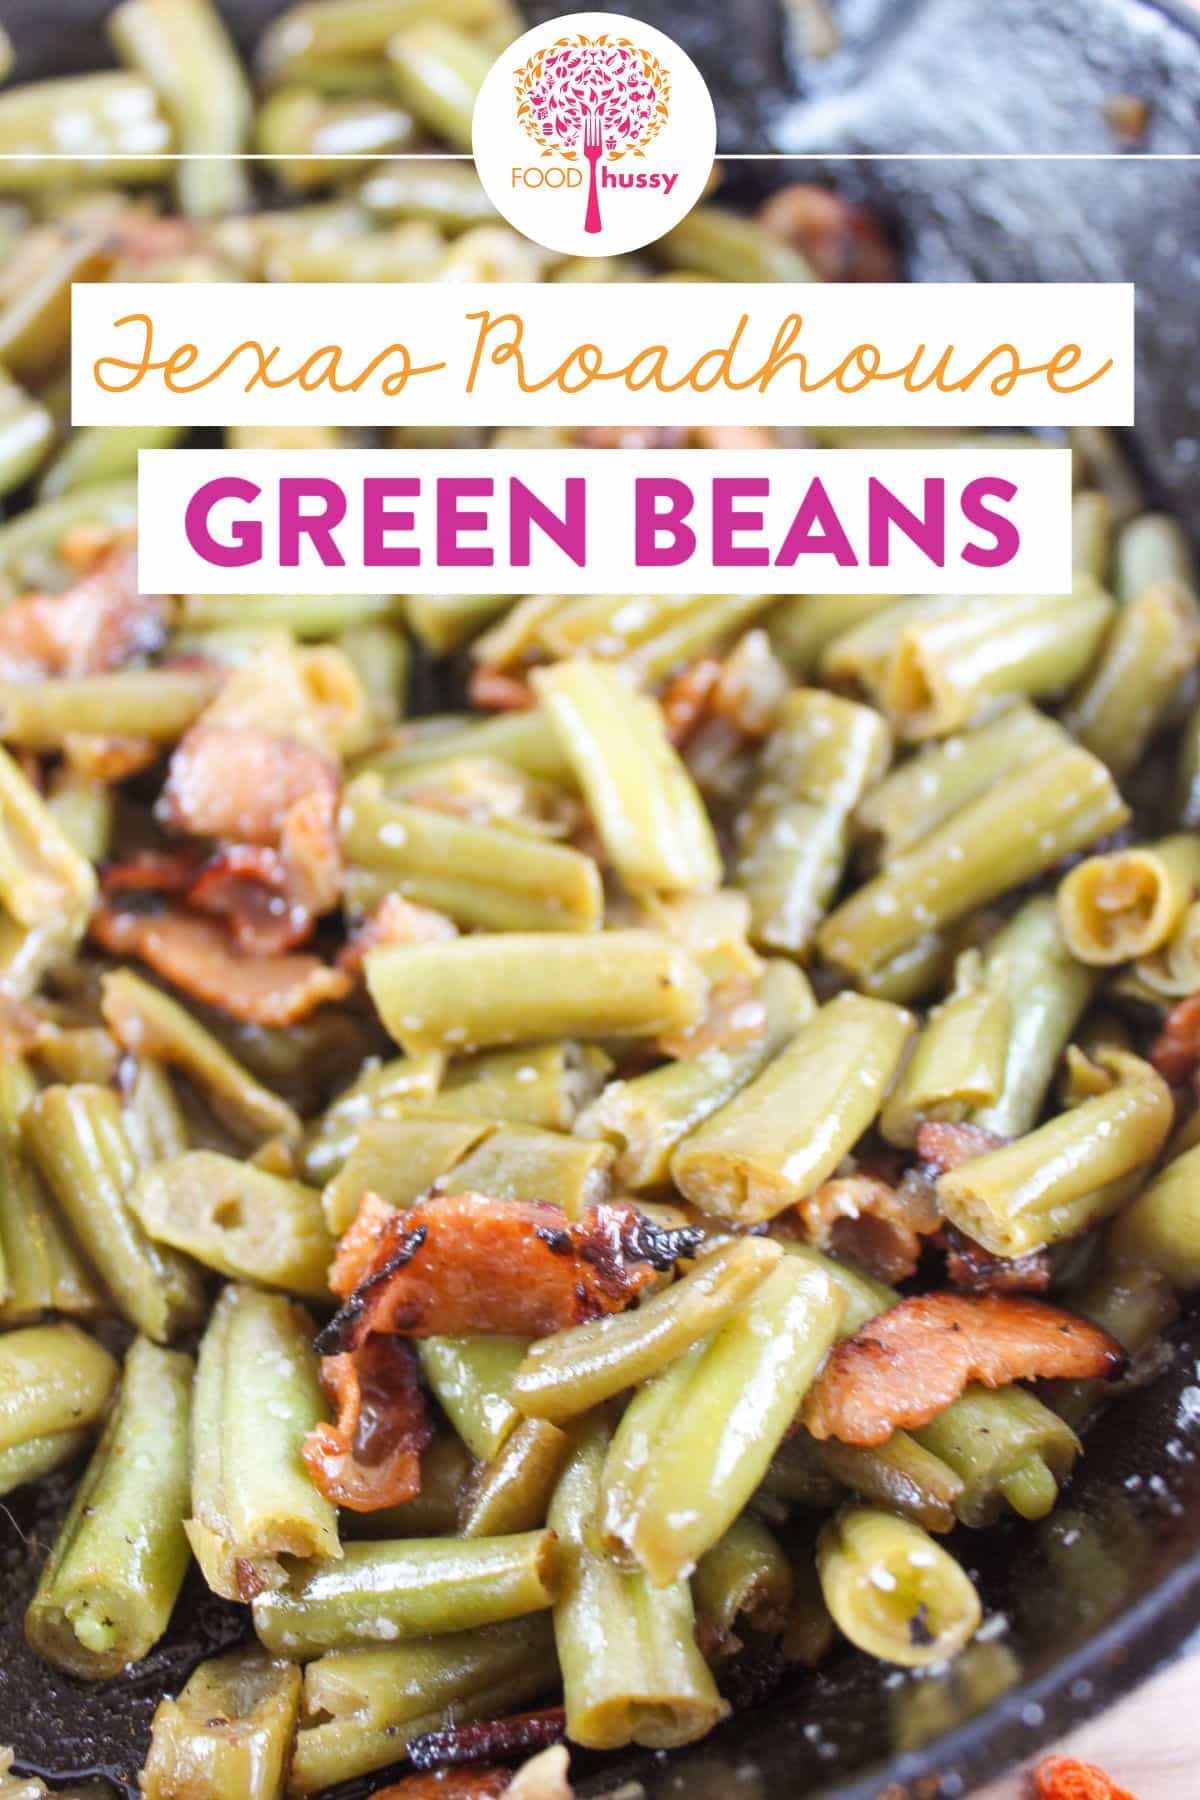 Texas Roadhouse Green Beans are the BEST! Buttery green beans with sauteed onions and smoky bacon bites - they are irresistible.  via @foodhussy